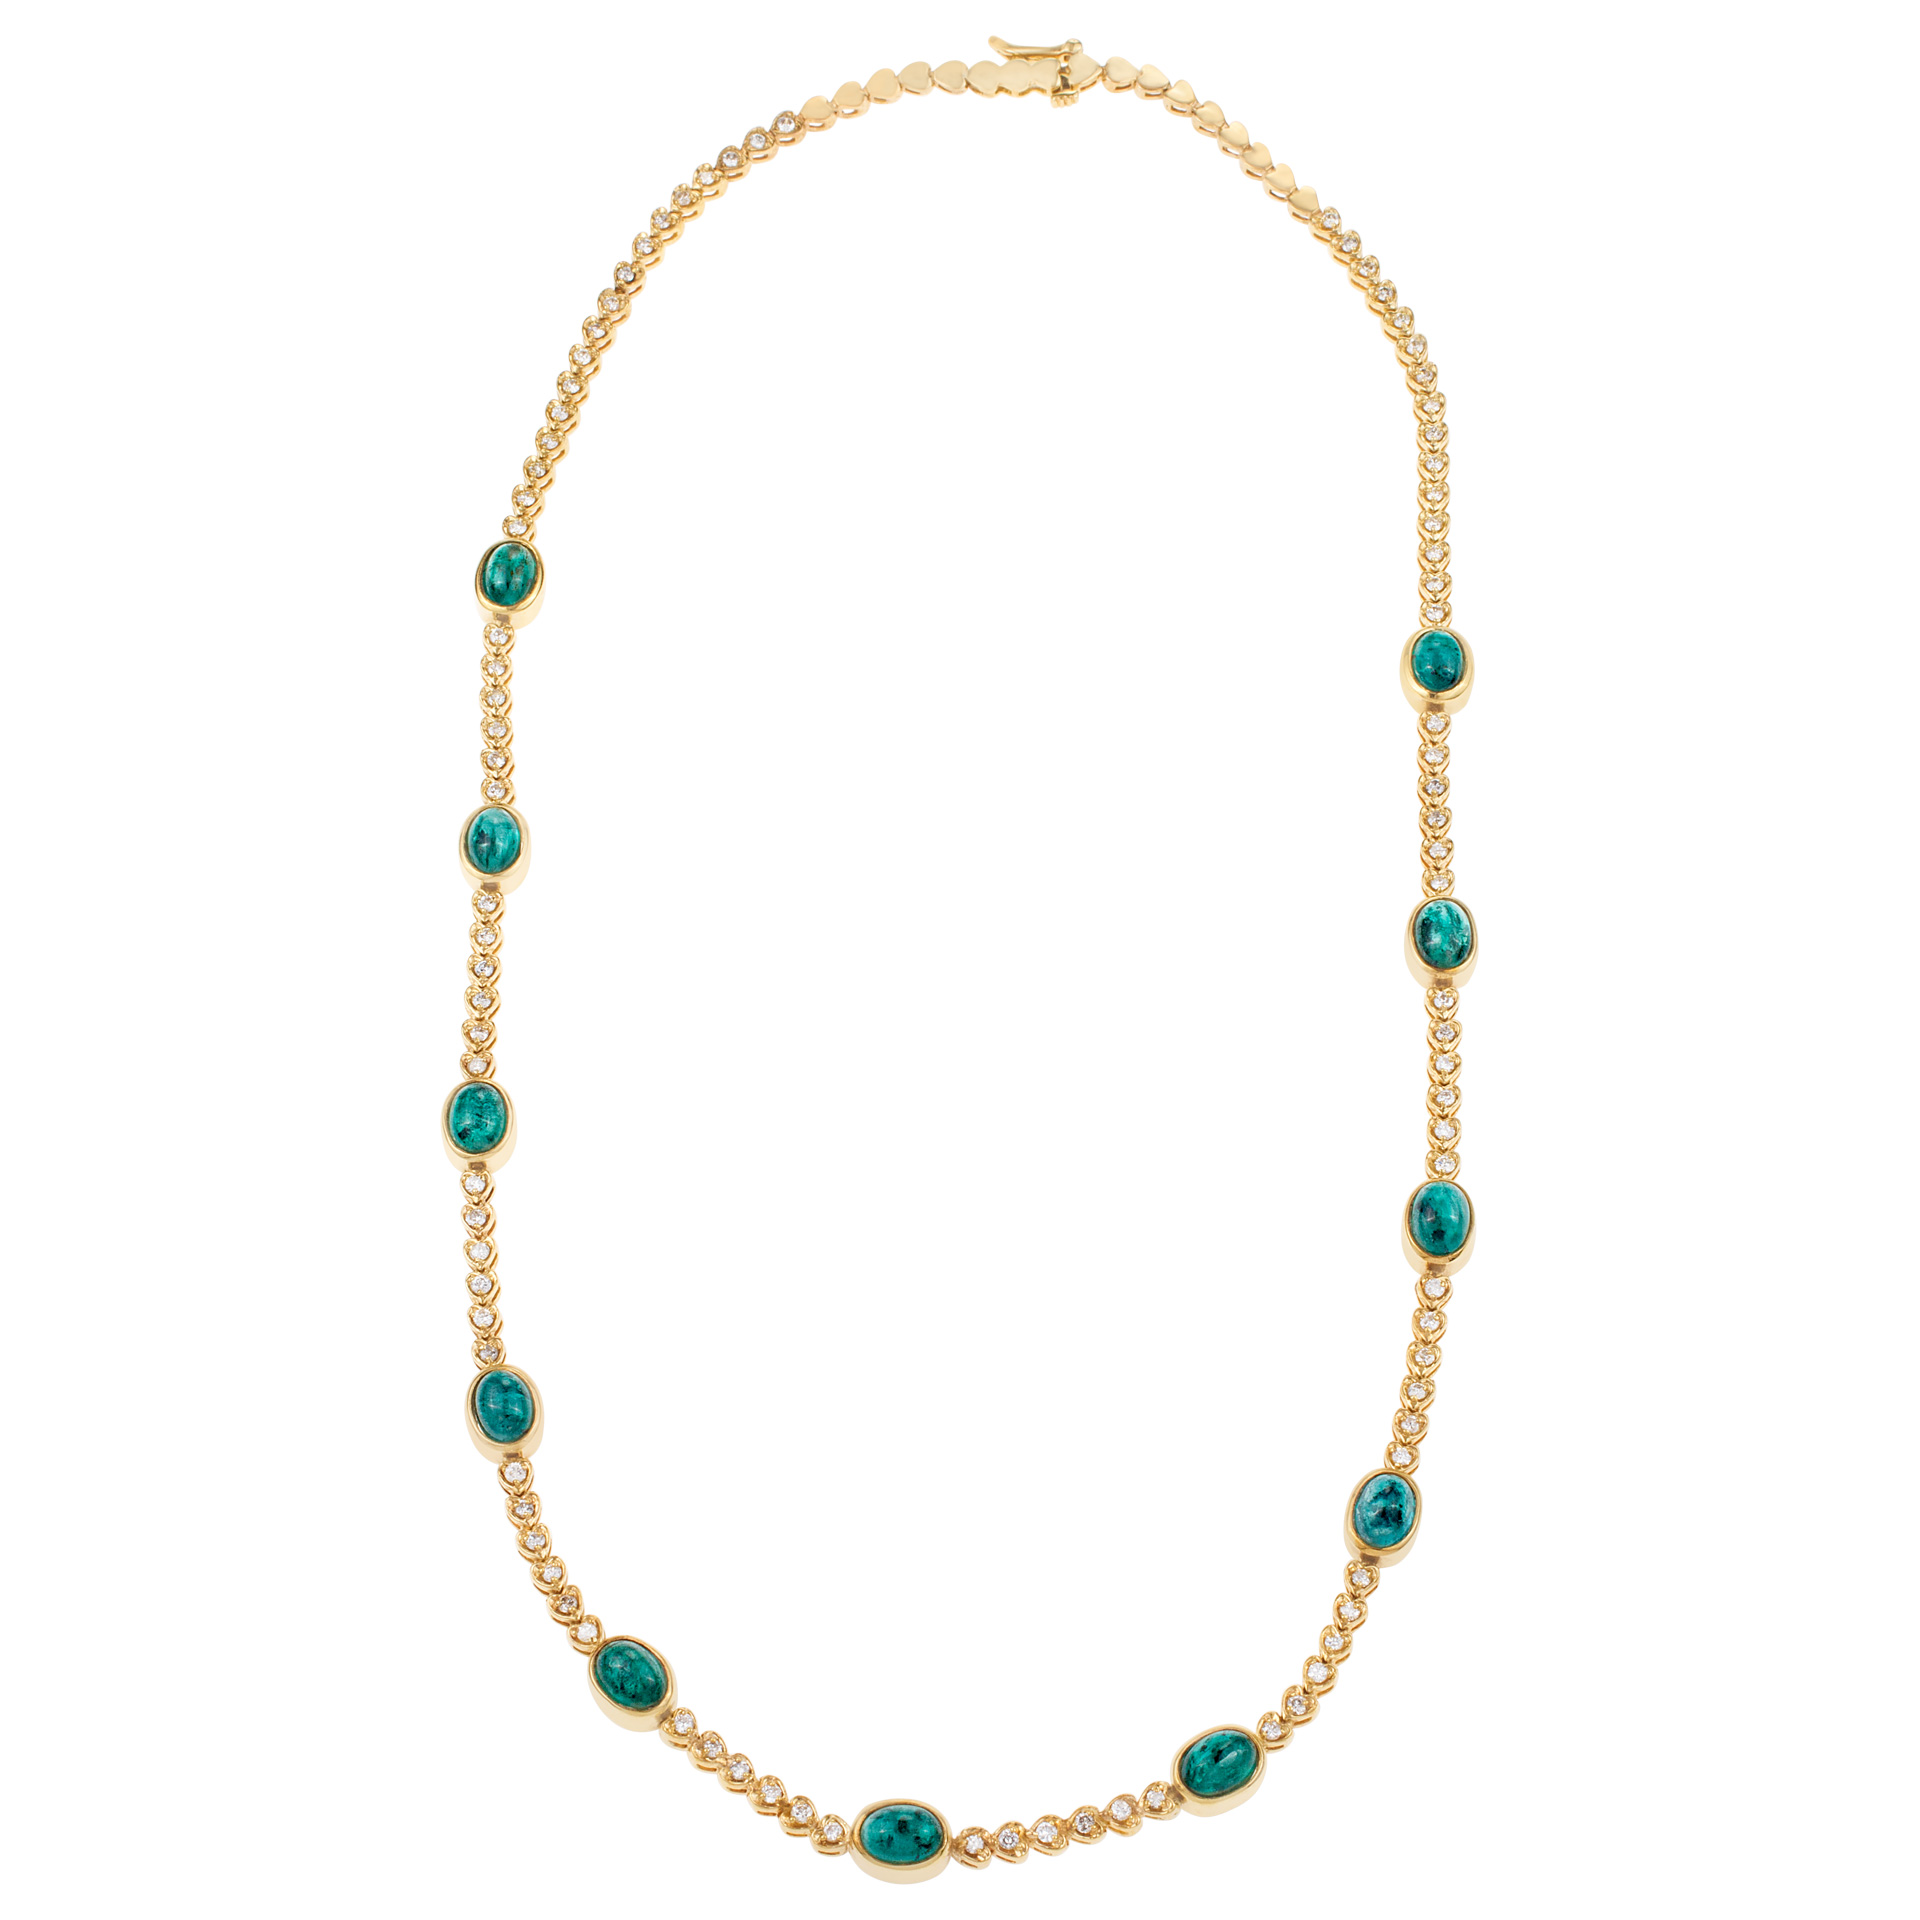 Cabachon emerald & diamond heart link necklace in 14k